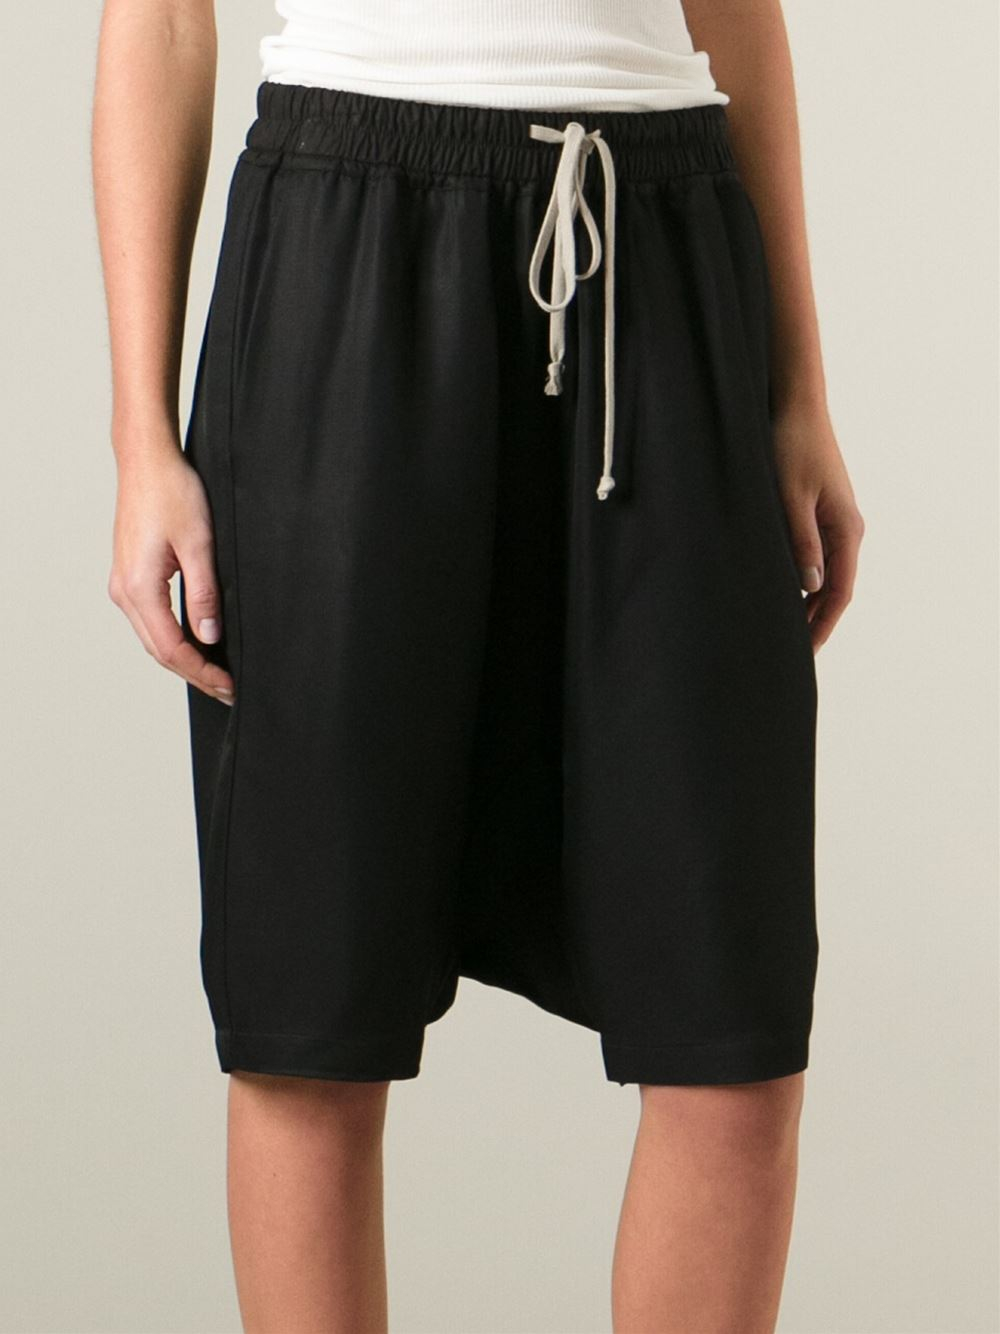 Rick Owens Loose Fit Knee Length Shorts in Black for Men - Lyst